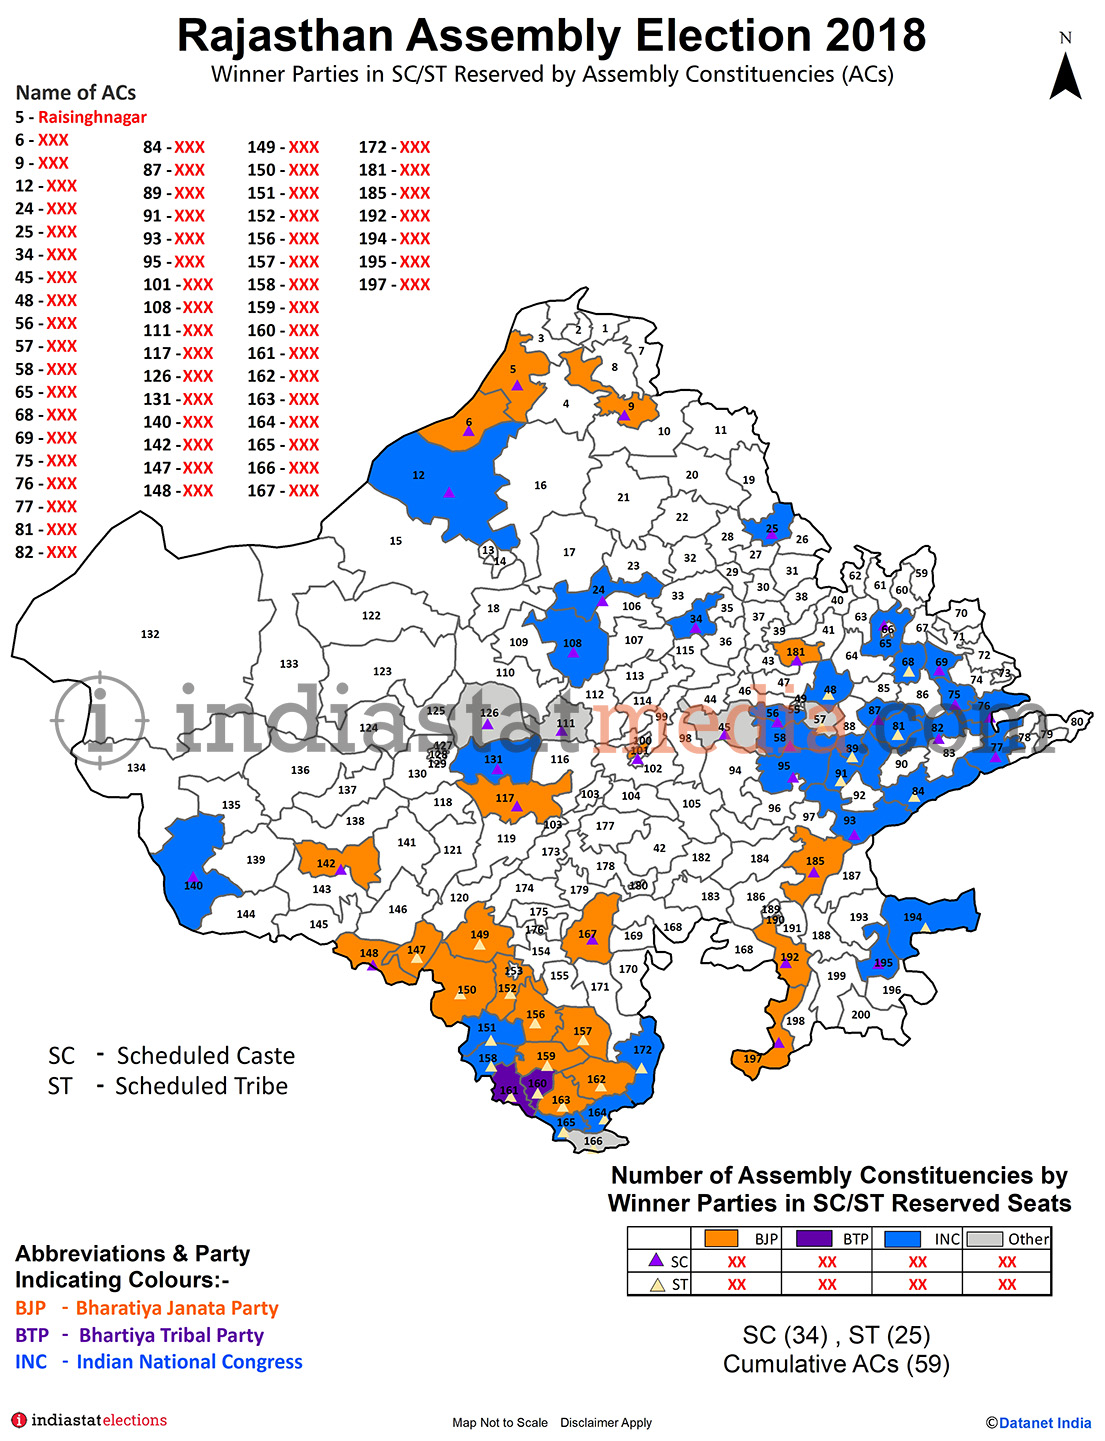 Winner Parties in Scheduled Caste (SC)/Scheduled Tribe (ST) Reserved Constituencies in Rajasthan Assembly Election (2018)